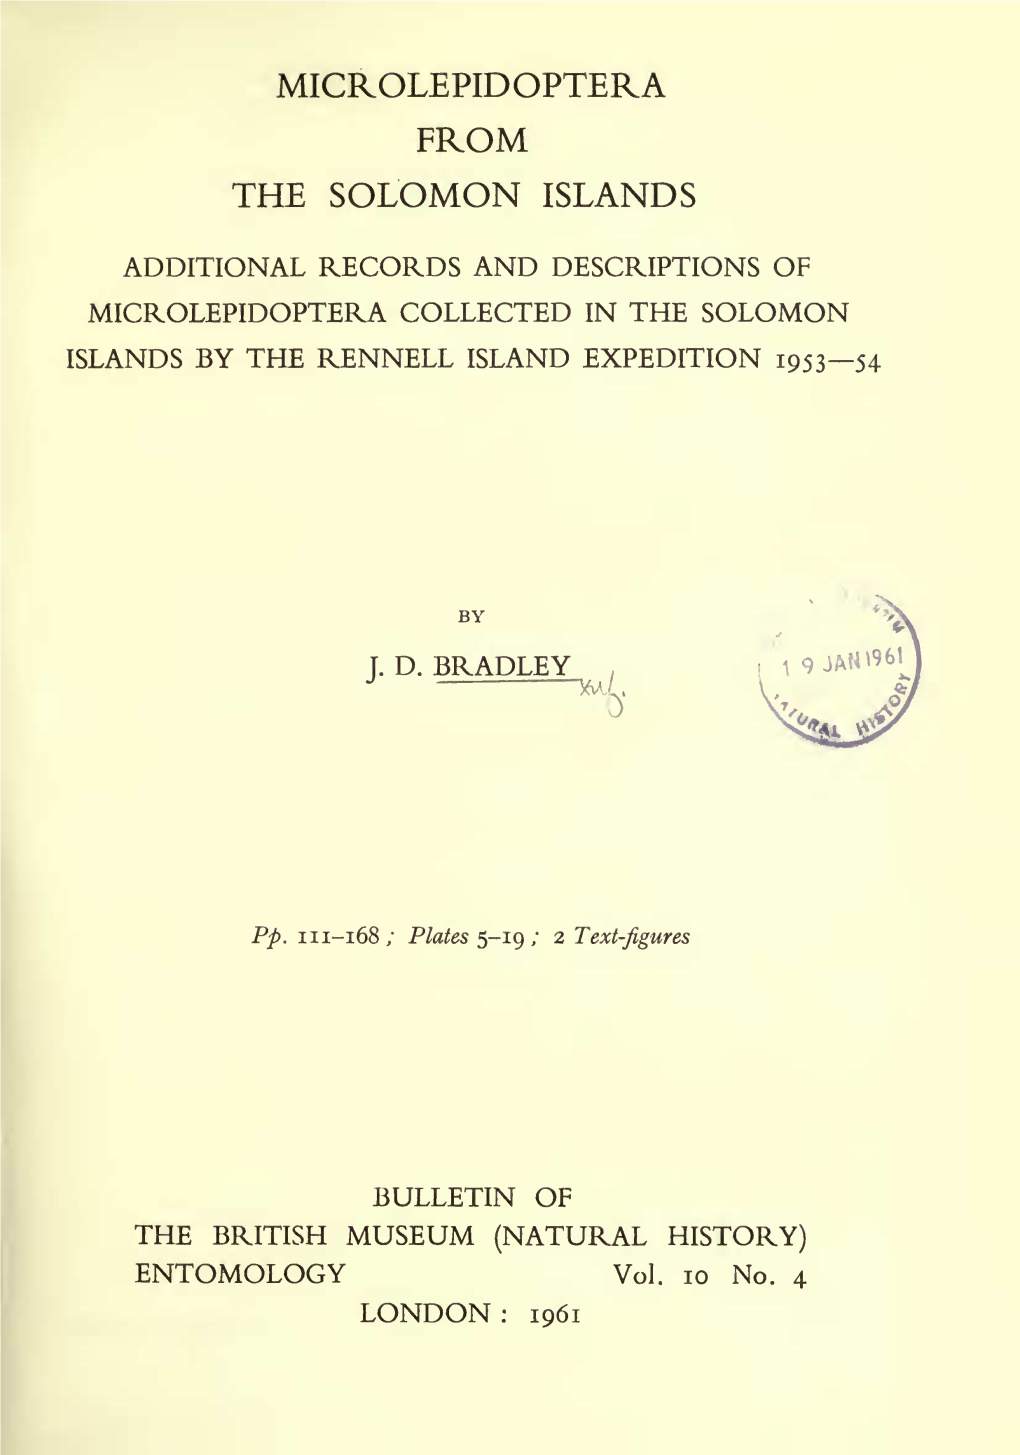 Bulletin of the Natural History Museum